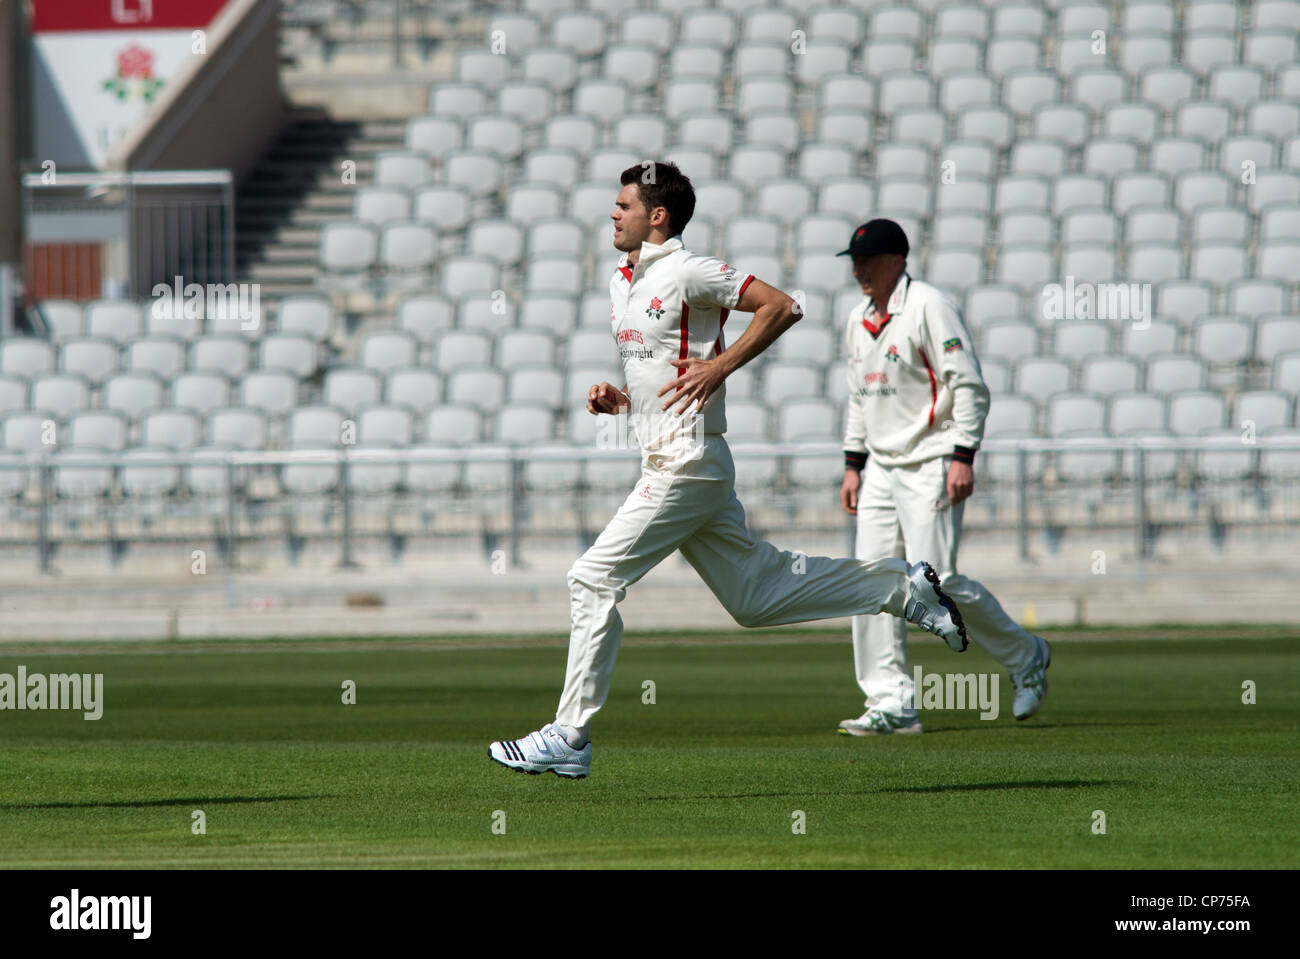 jimmy anderson runs in to bowl at old trafford cricket ground Stock Photo